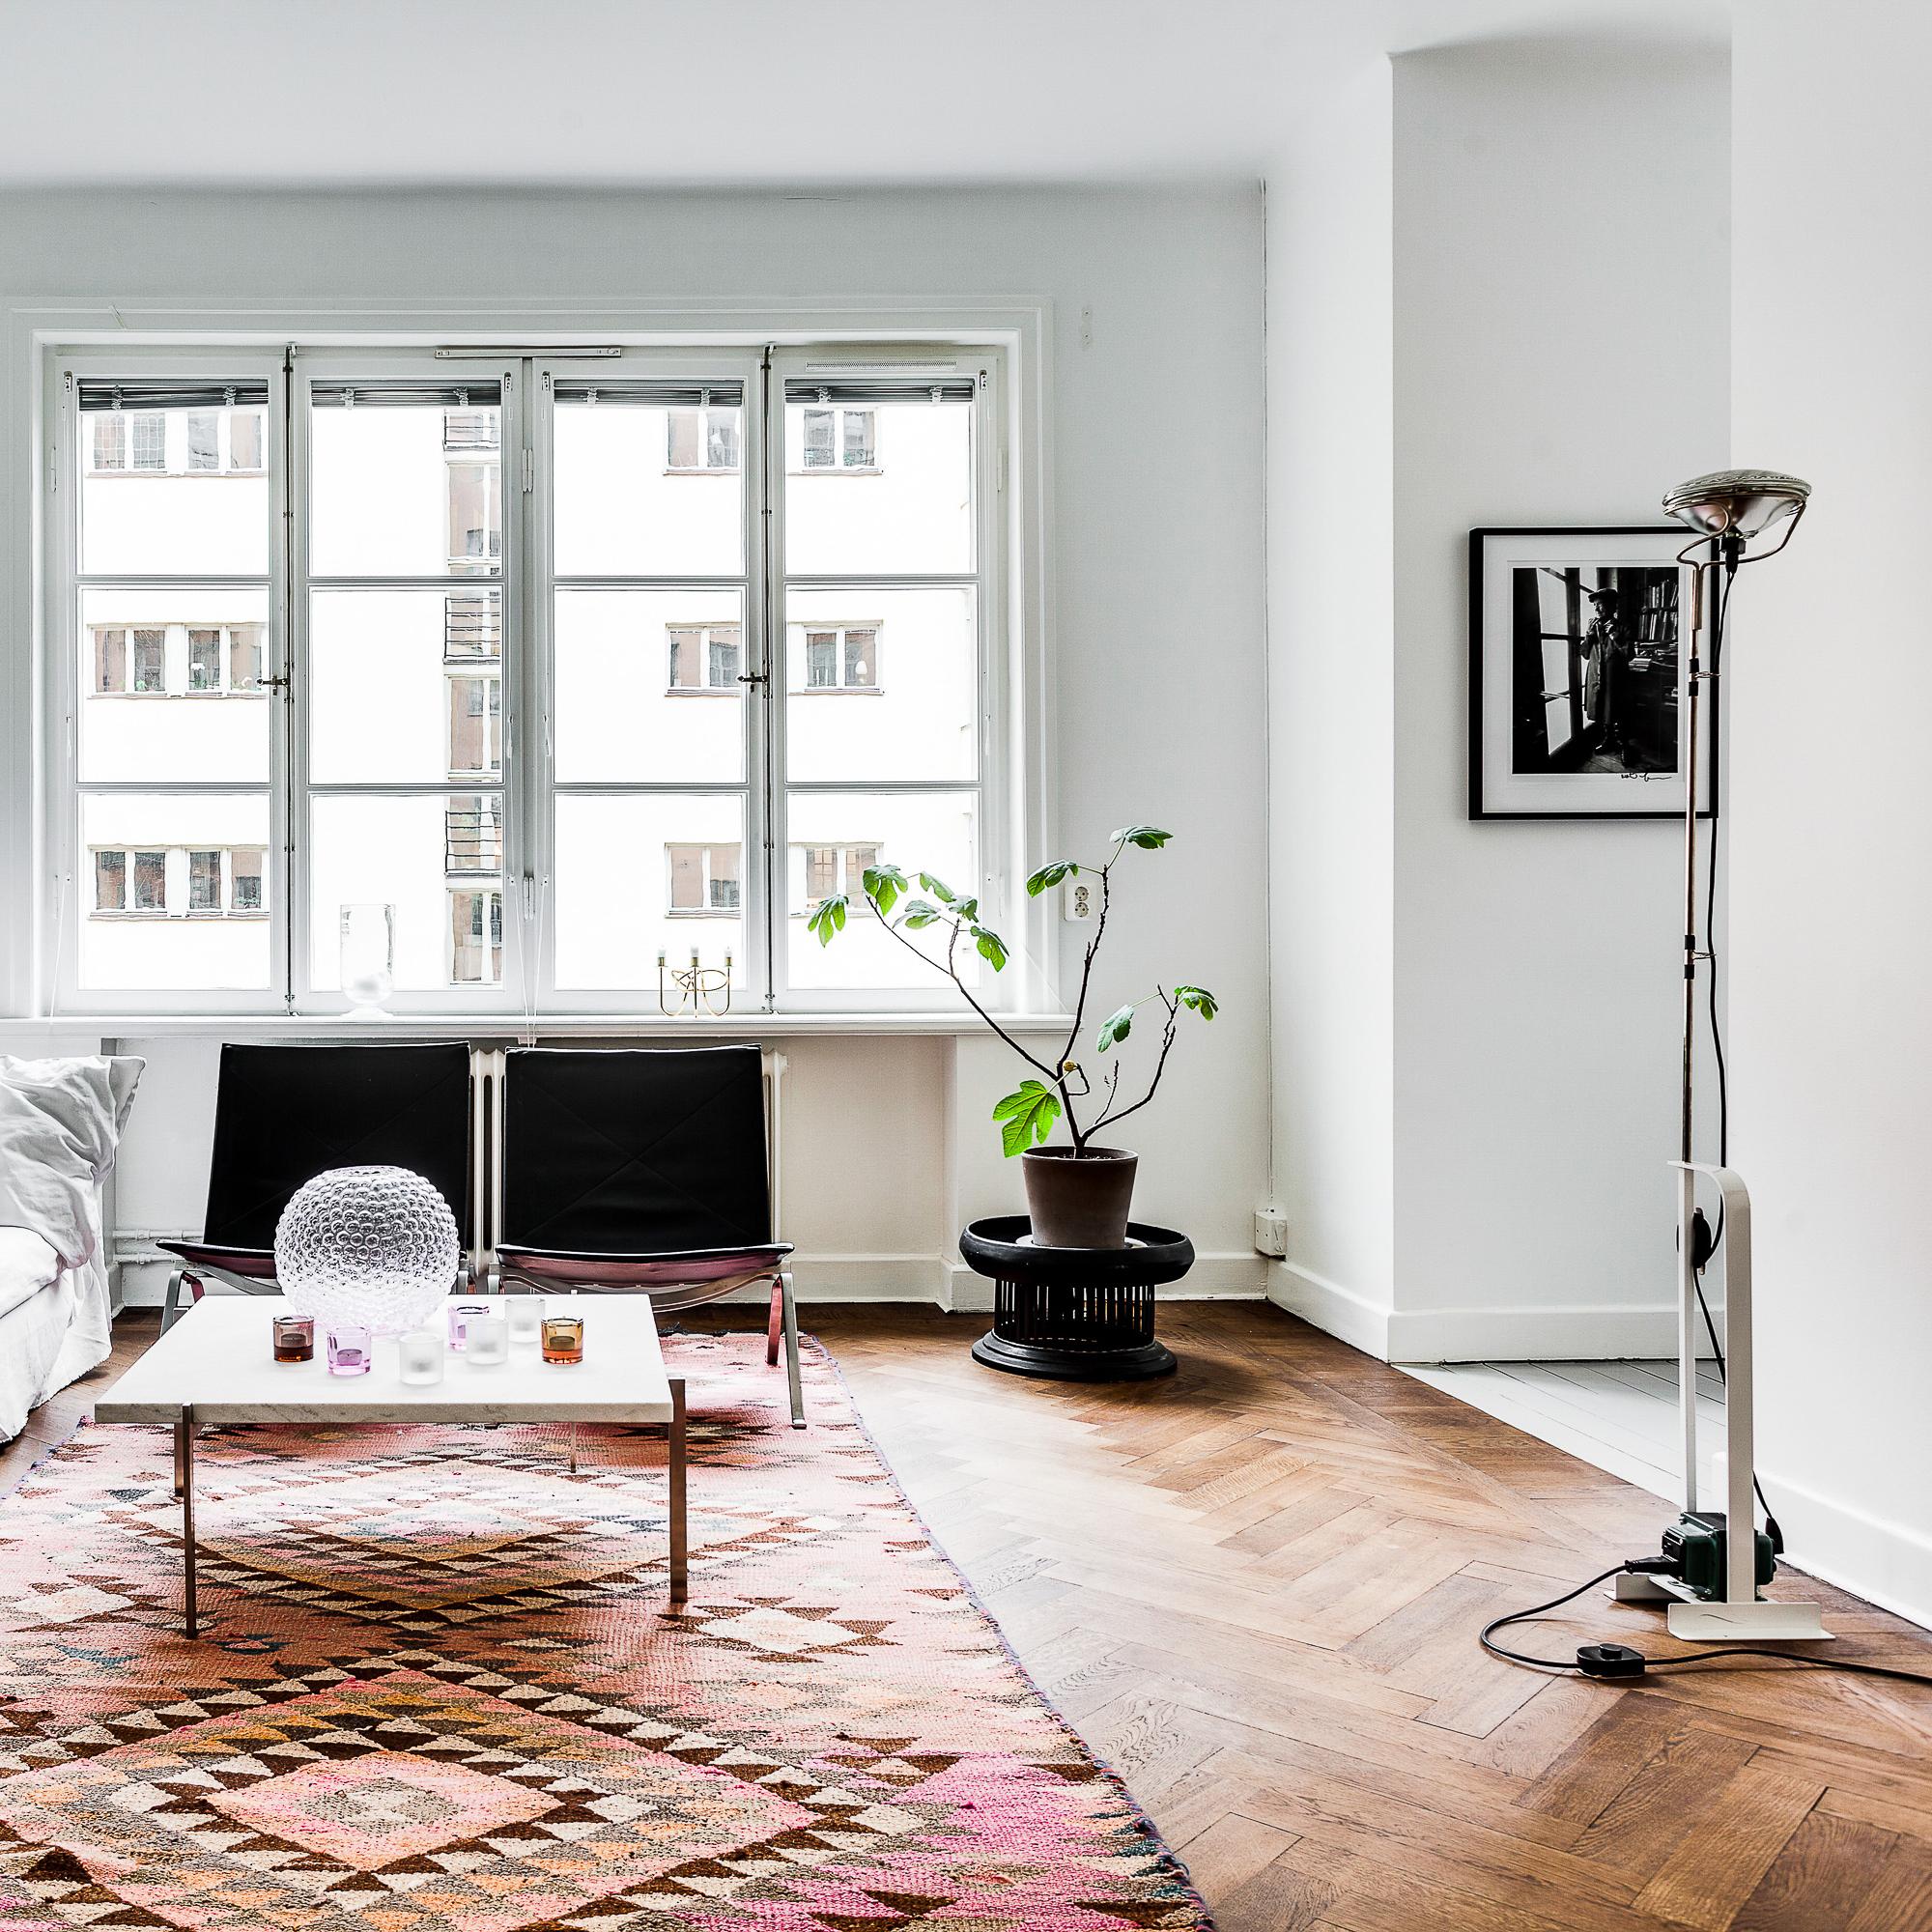 FLOS Toio Floor Lamp in White by Achille & Pier Giacomo Castiglioni In New Condition For Sale In Brooklyn, NY